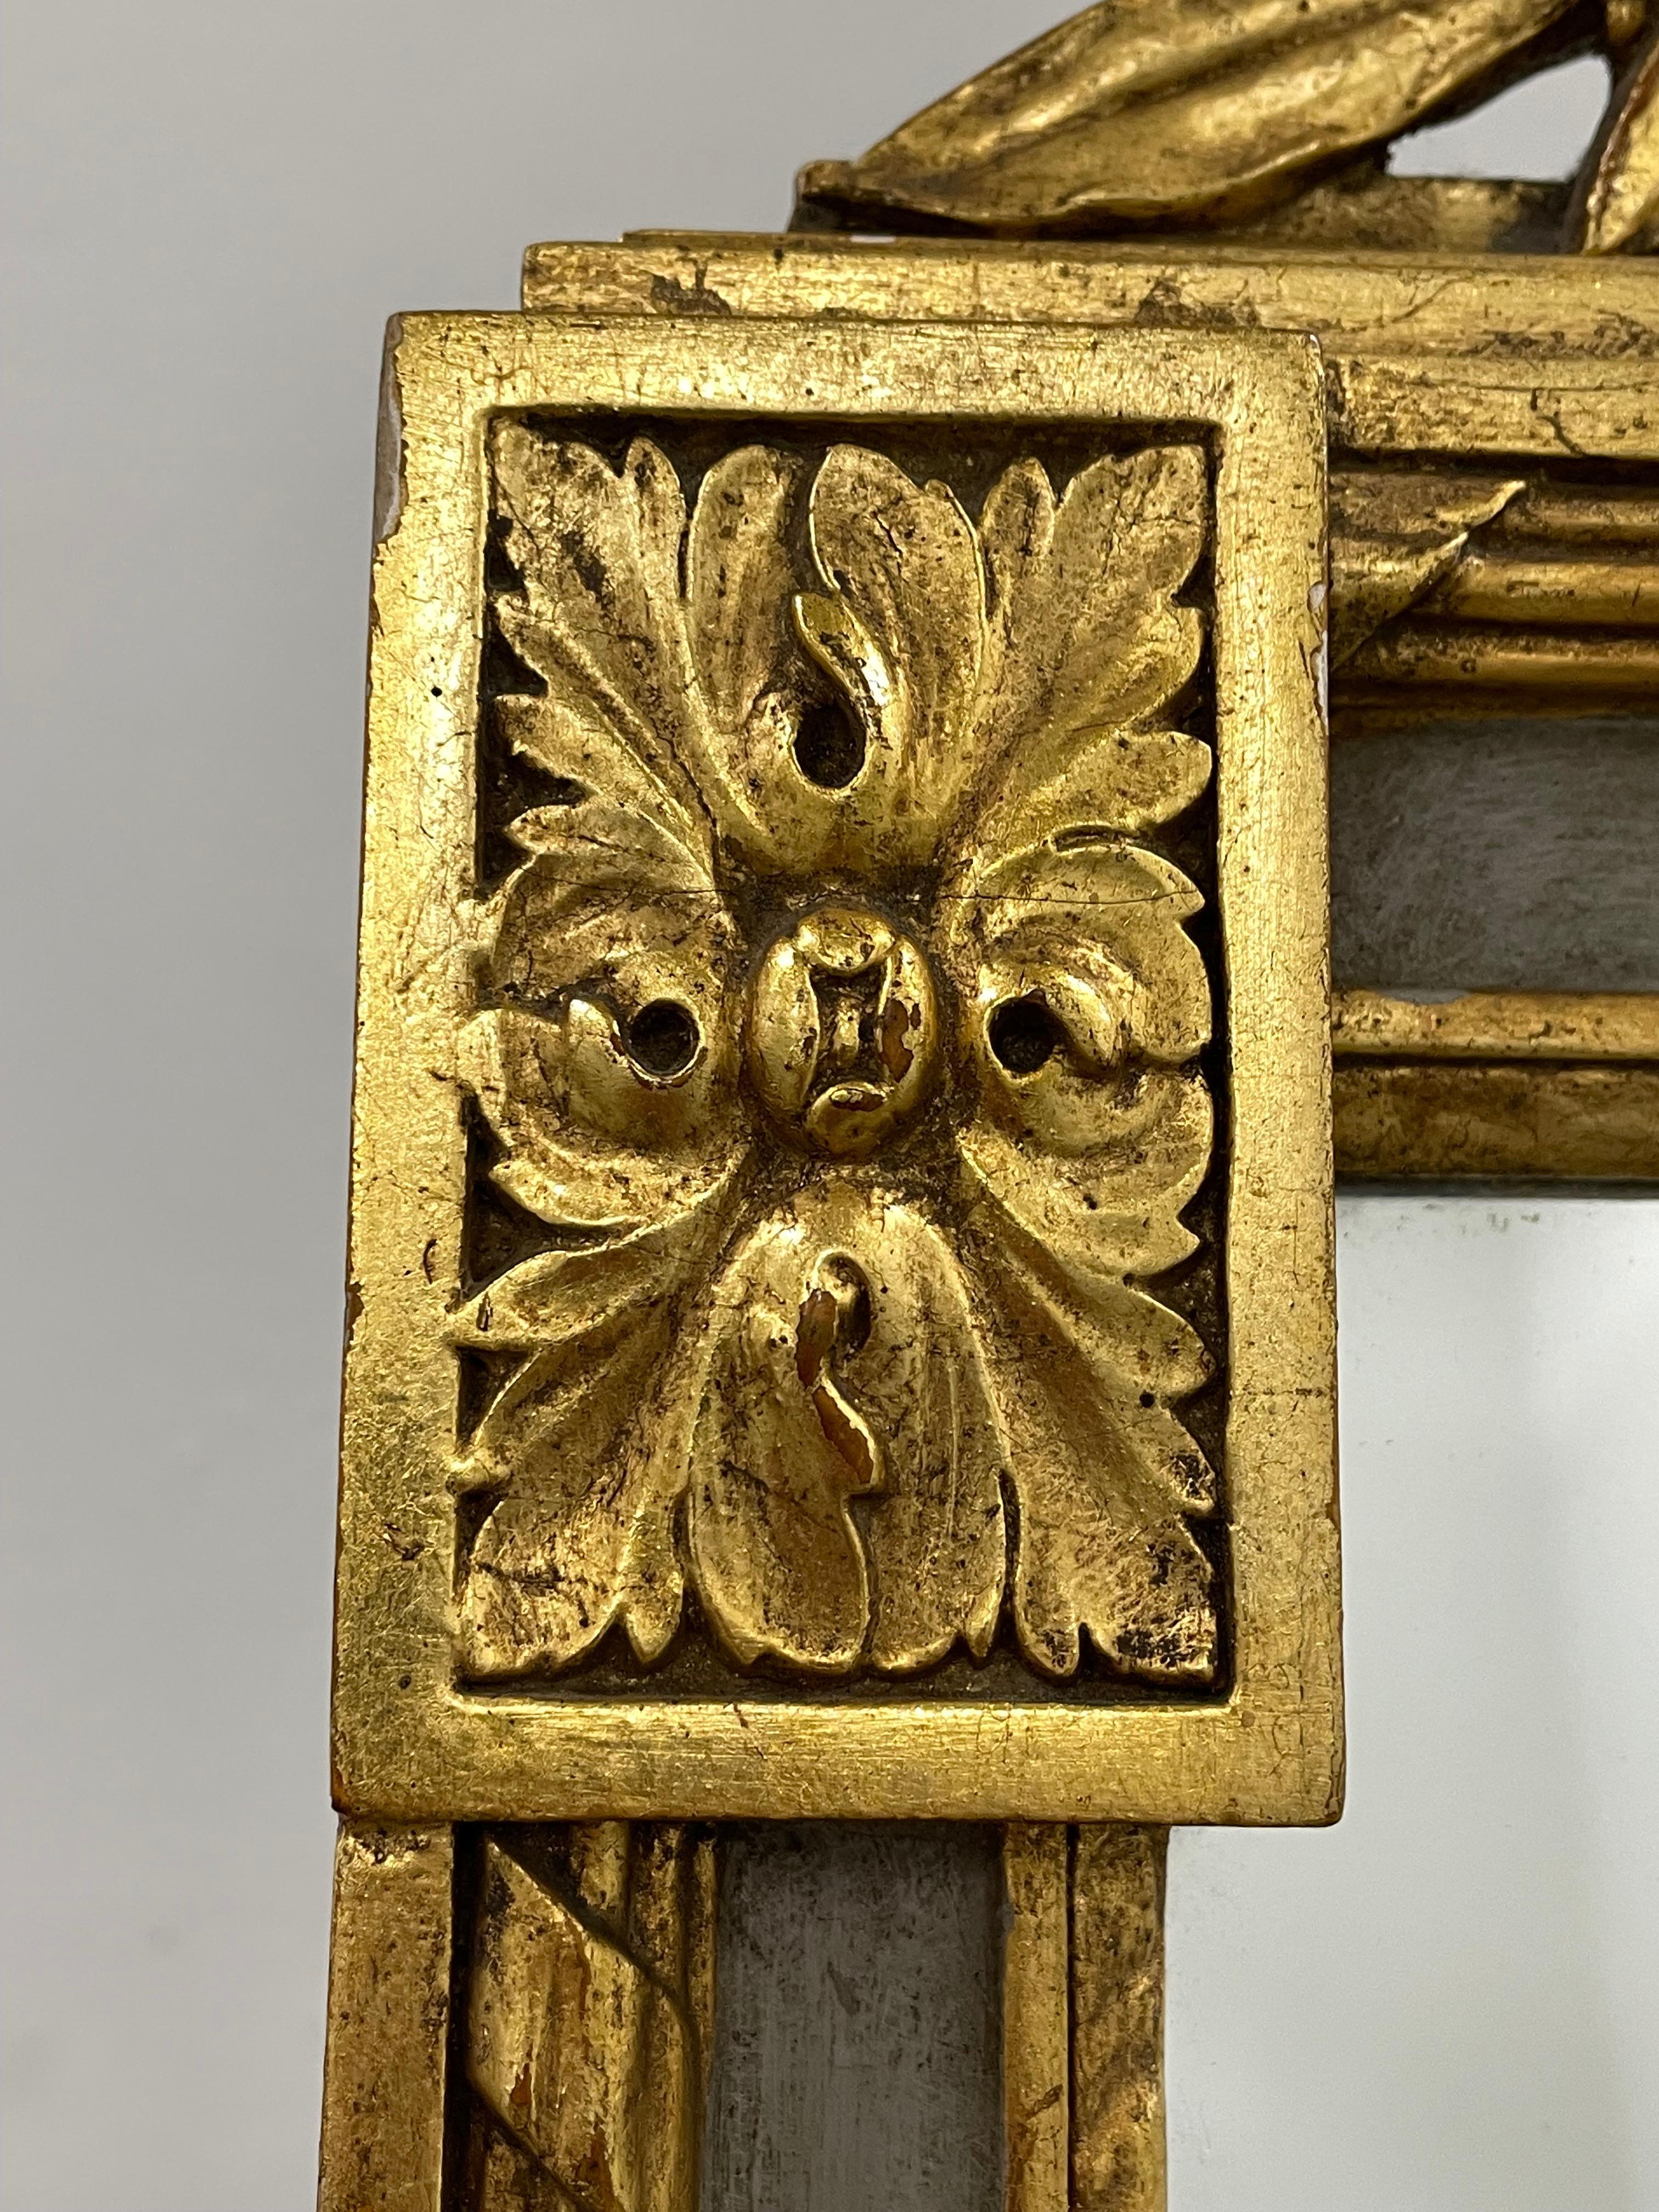 C. 20th Century

Gold Giltwood Scroll Top Mirror, Elaborate Carved.